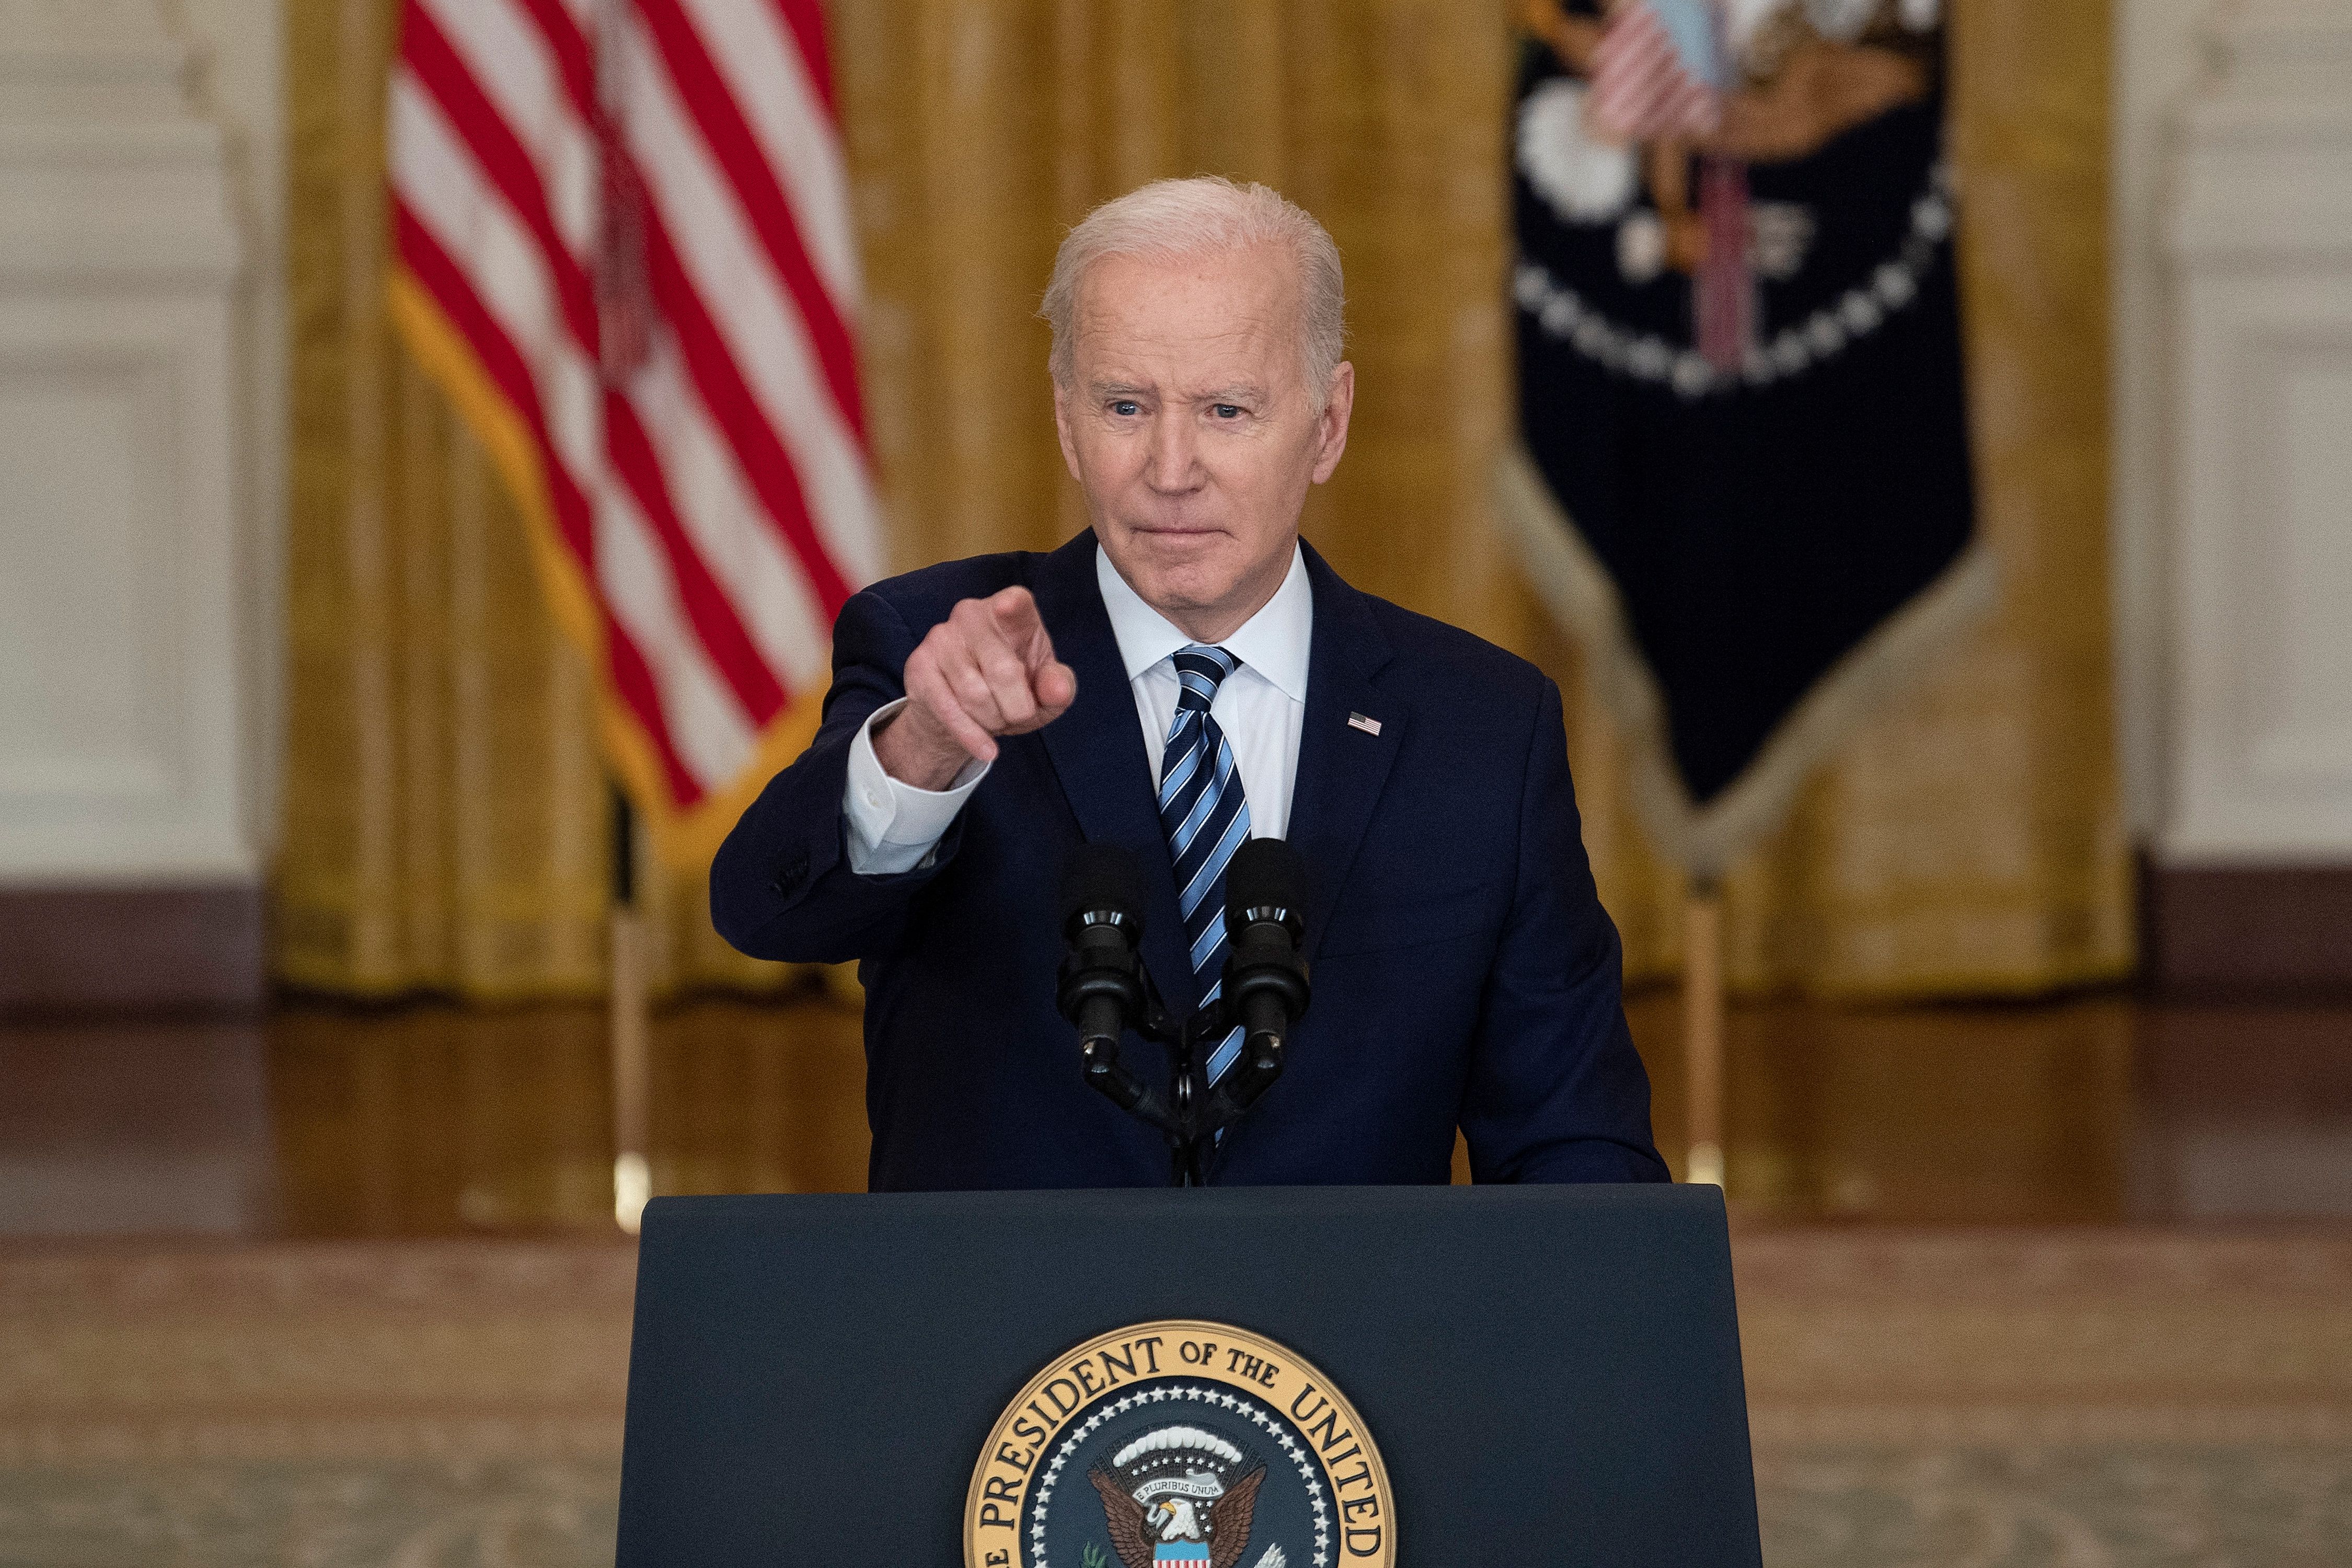 President Joe Biden takes questions after making a statement about Russia's invasion of Ukraine on Thursday, February 24, 2022, at the White House in Washington, D.C.